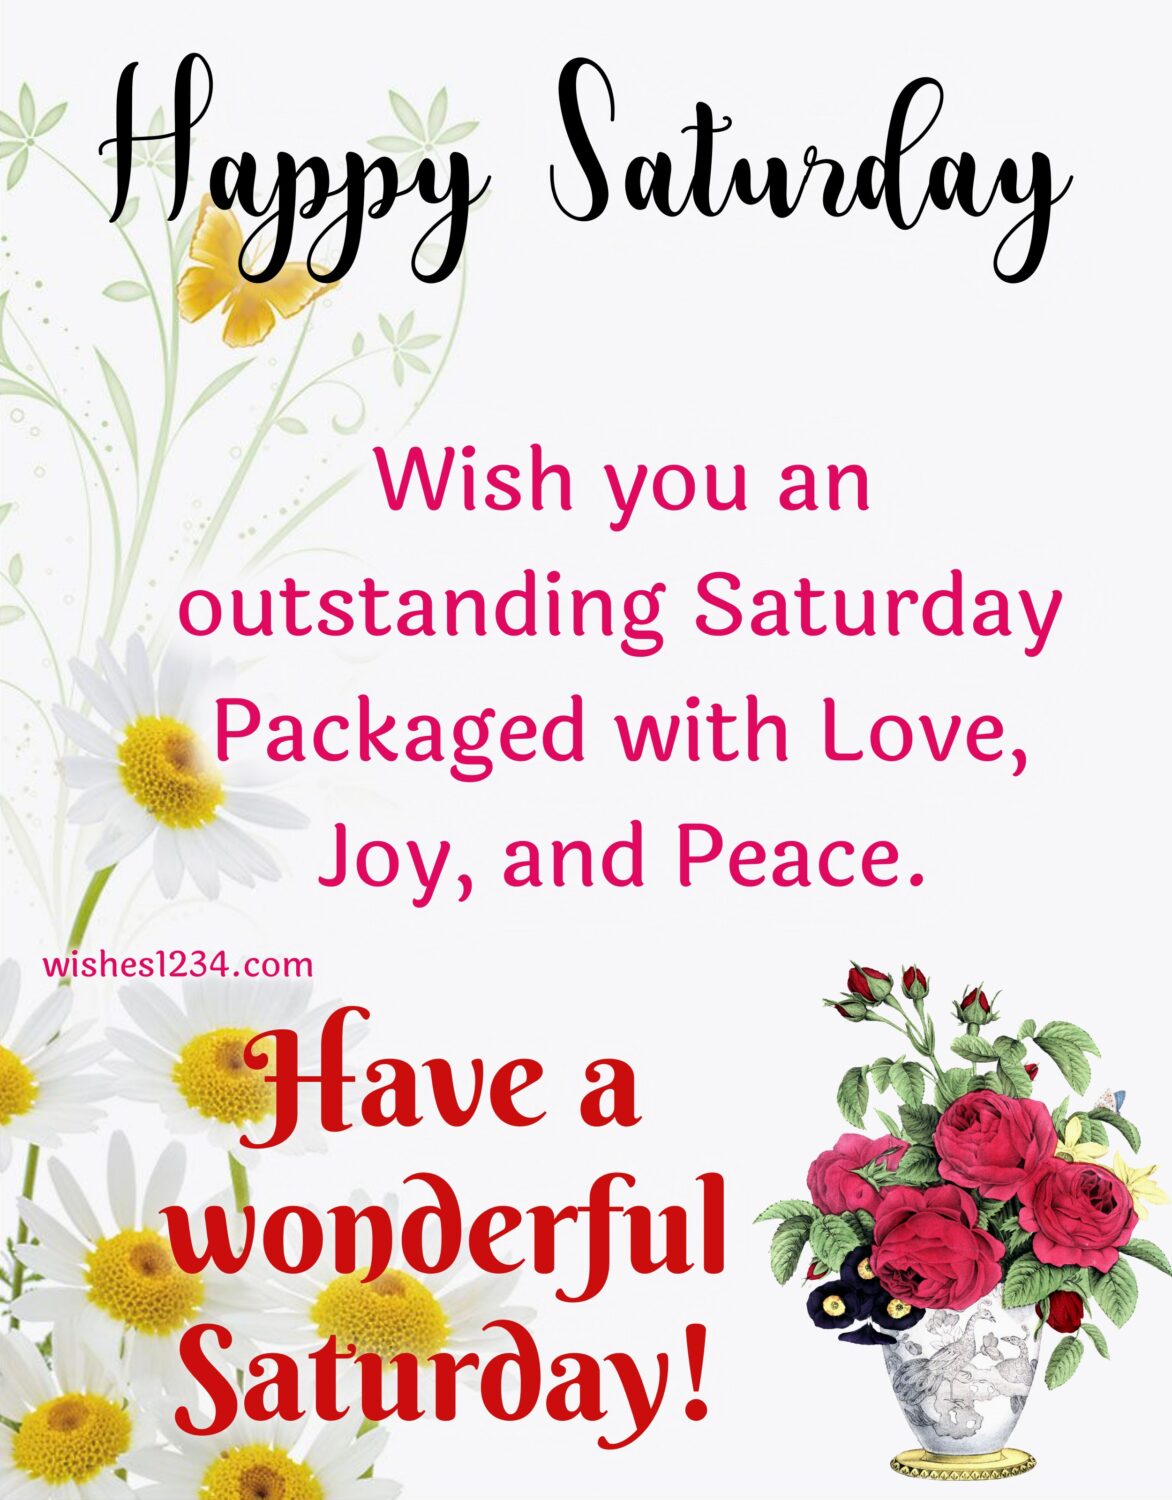 Saturday quotes with white daisy background, Good Morning Saturday Images.